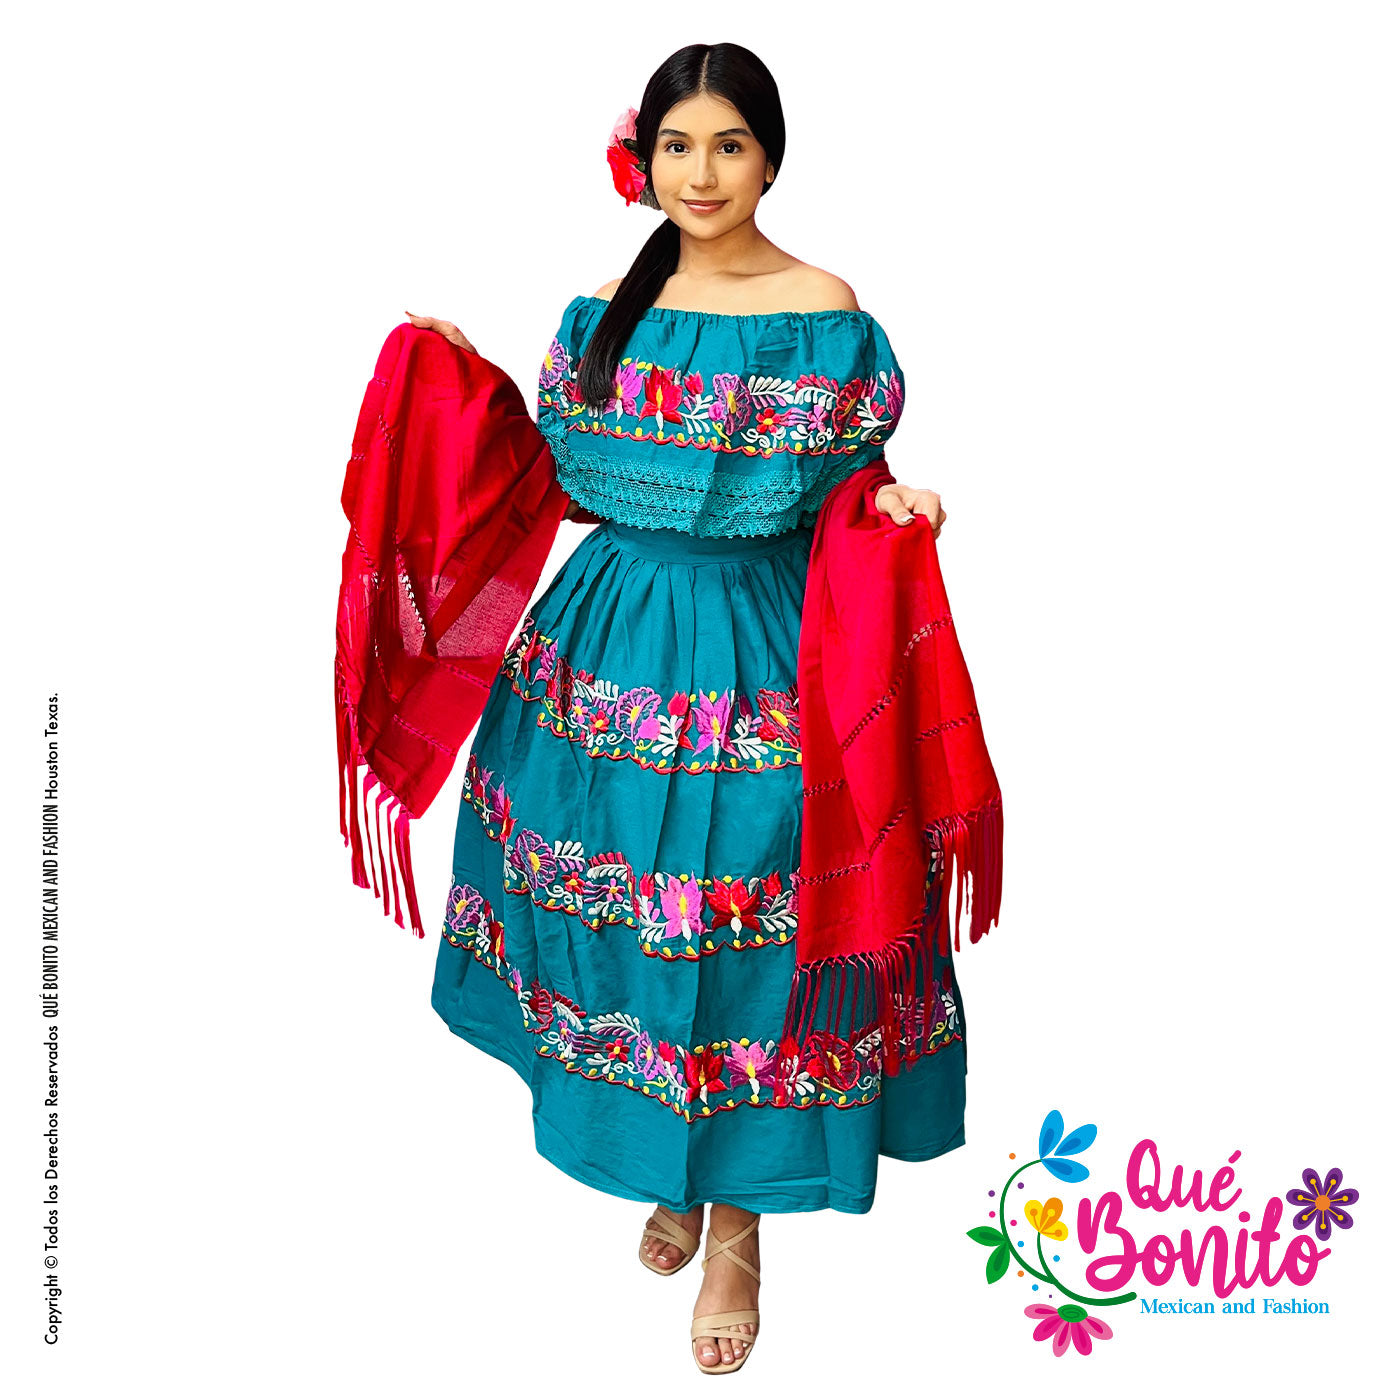 Fiesta Party Dress Teal  Que Bonito Mexican and Fashion